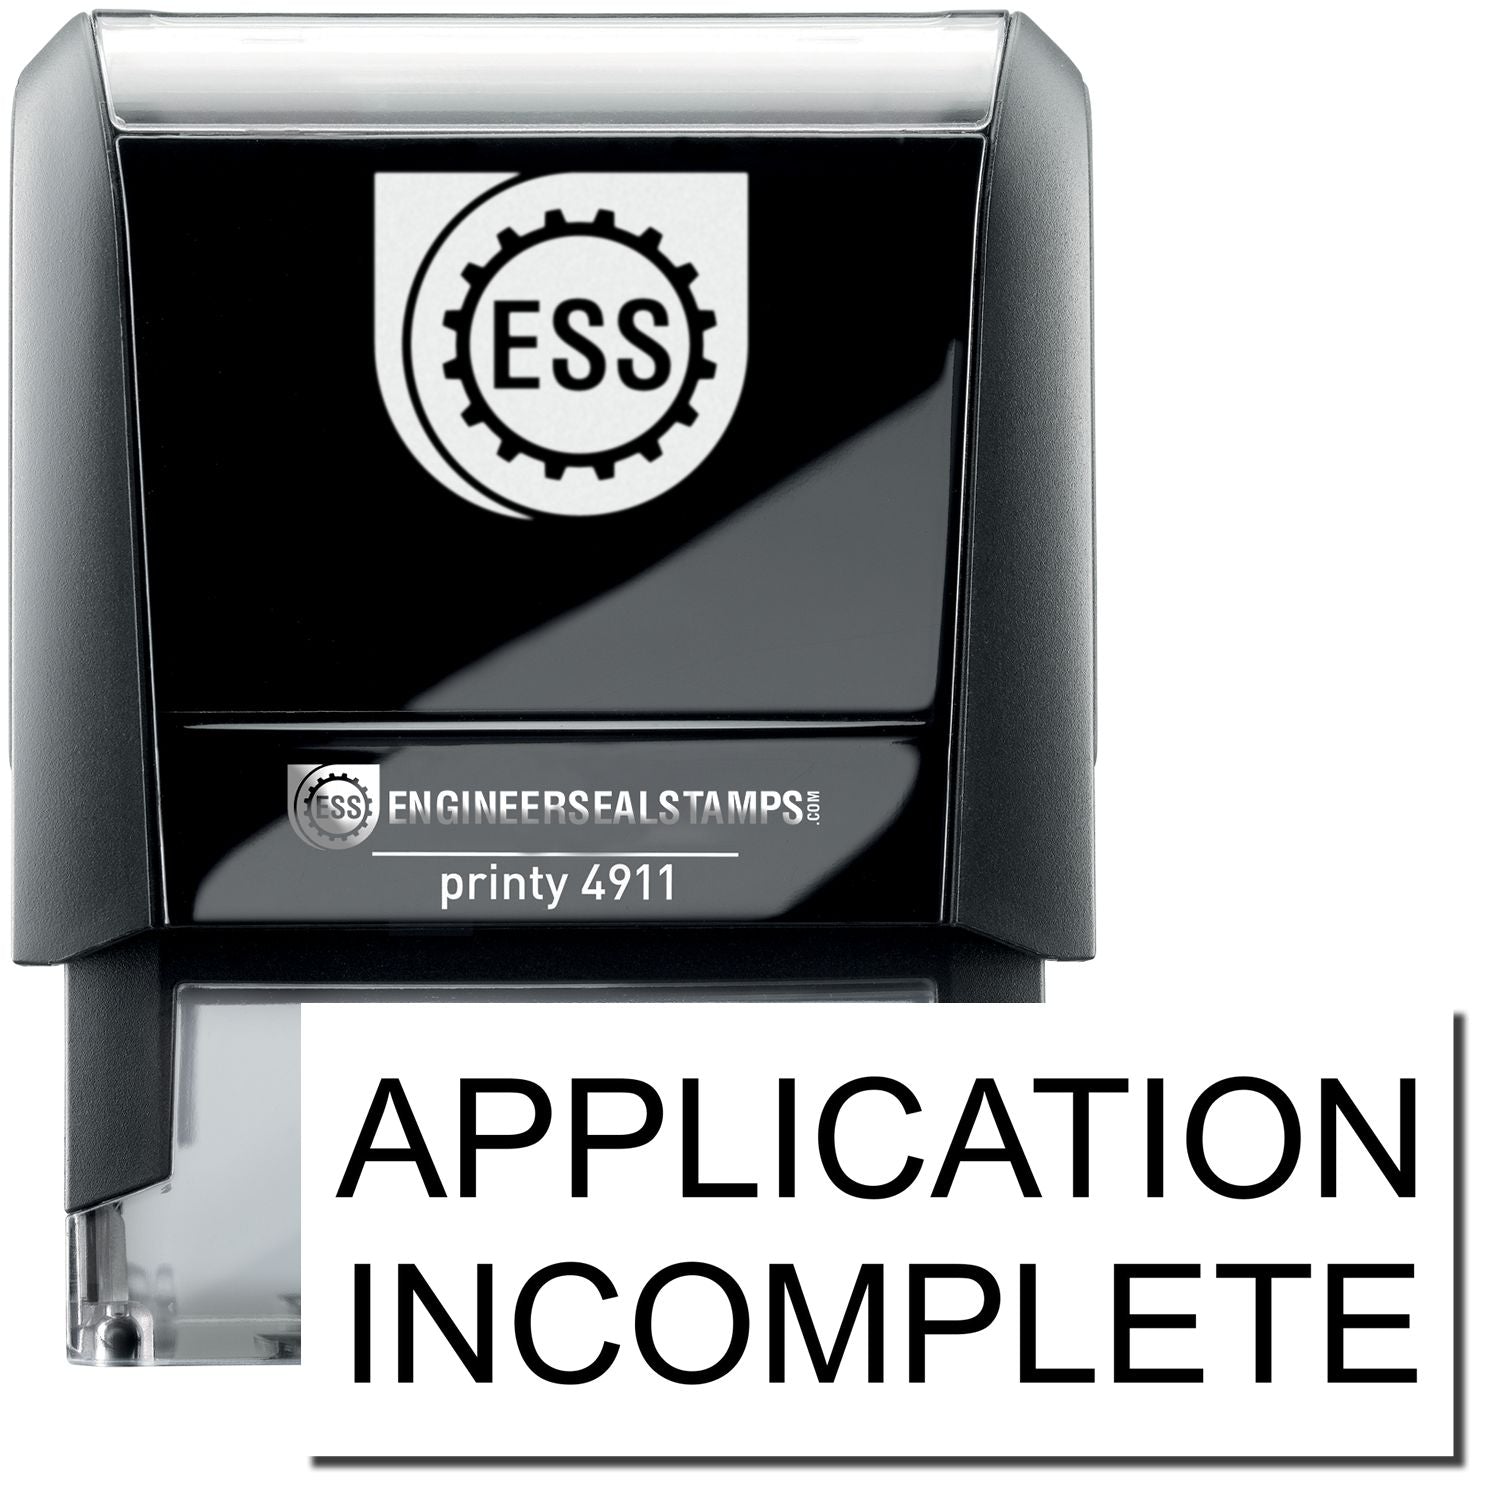 A self-inking stamp with a stamped image showing how the text "APPLICATION INCOMPLETE" is displayed after stamping.